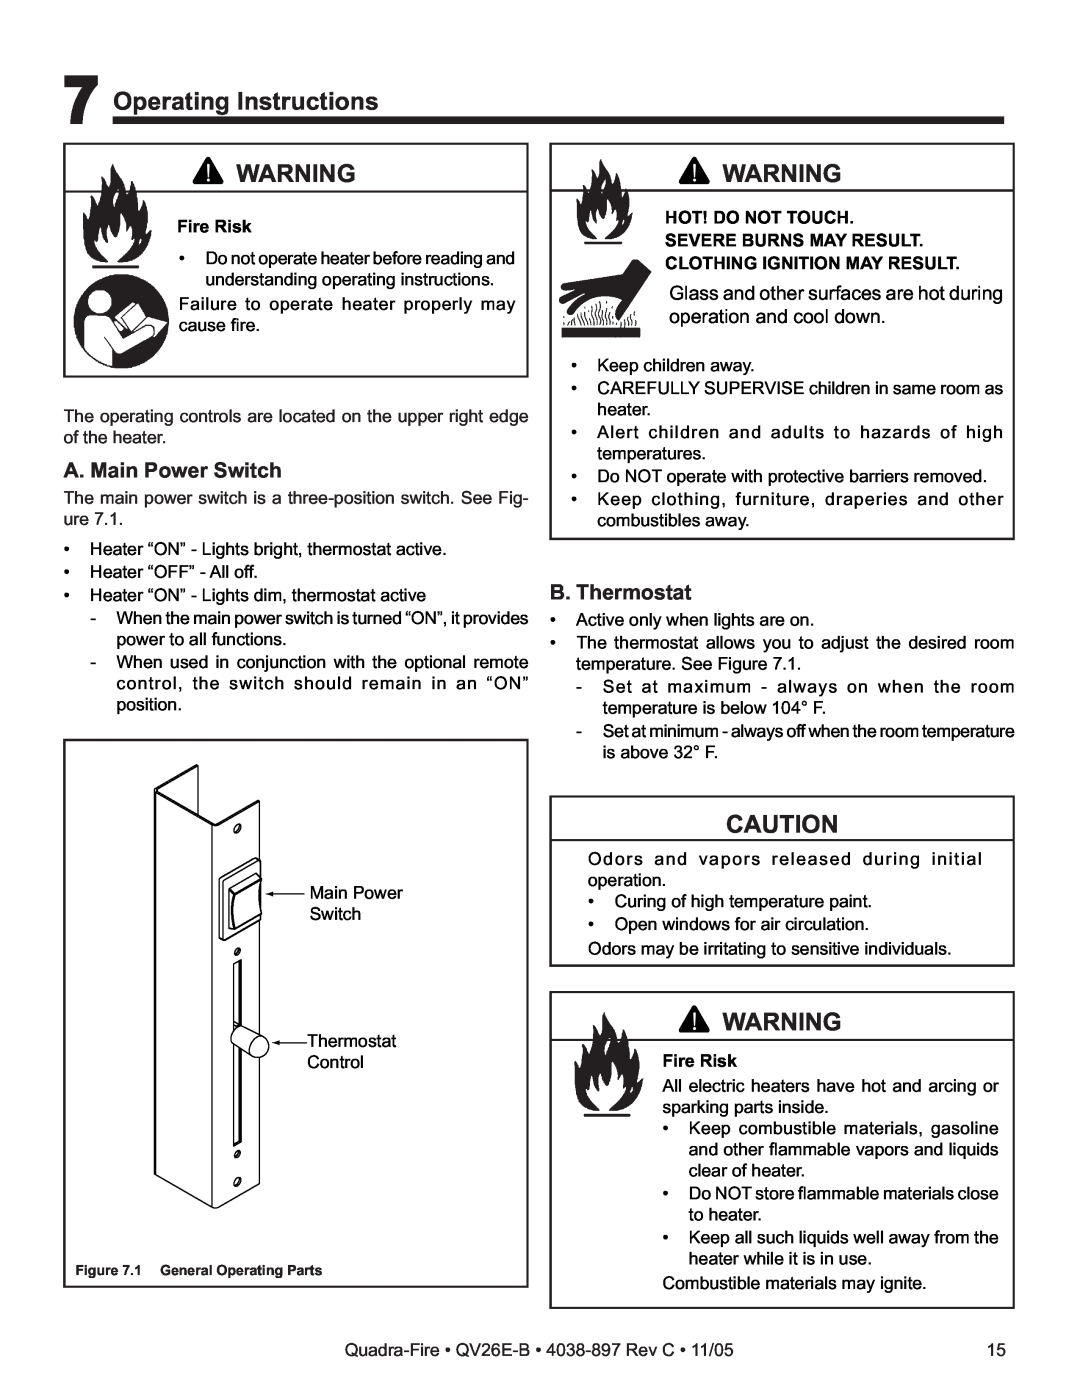 Quadra-Fire QV26E-B Operating Instructions, A. Main Power Switch, B. Thermostat, Glass and other surfaces are hot during 